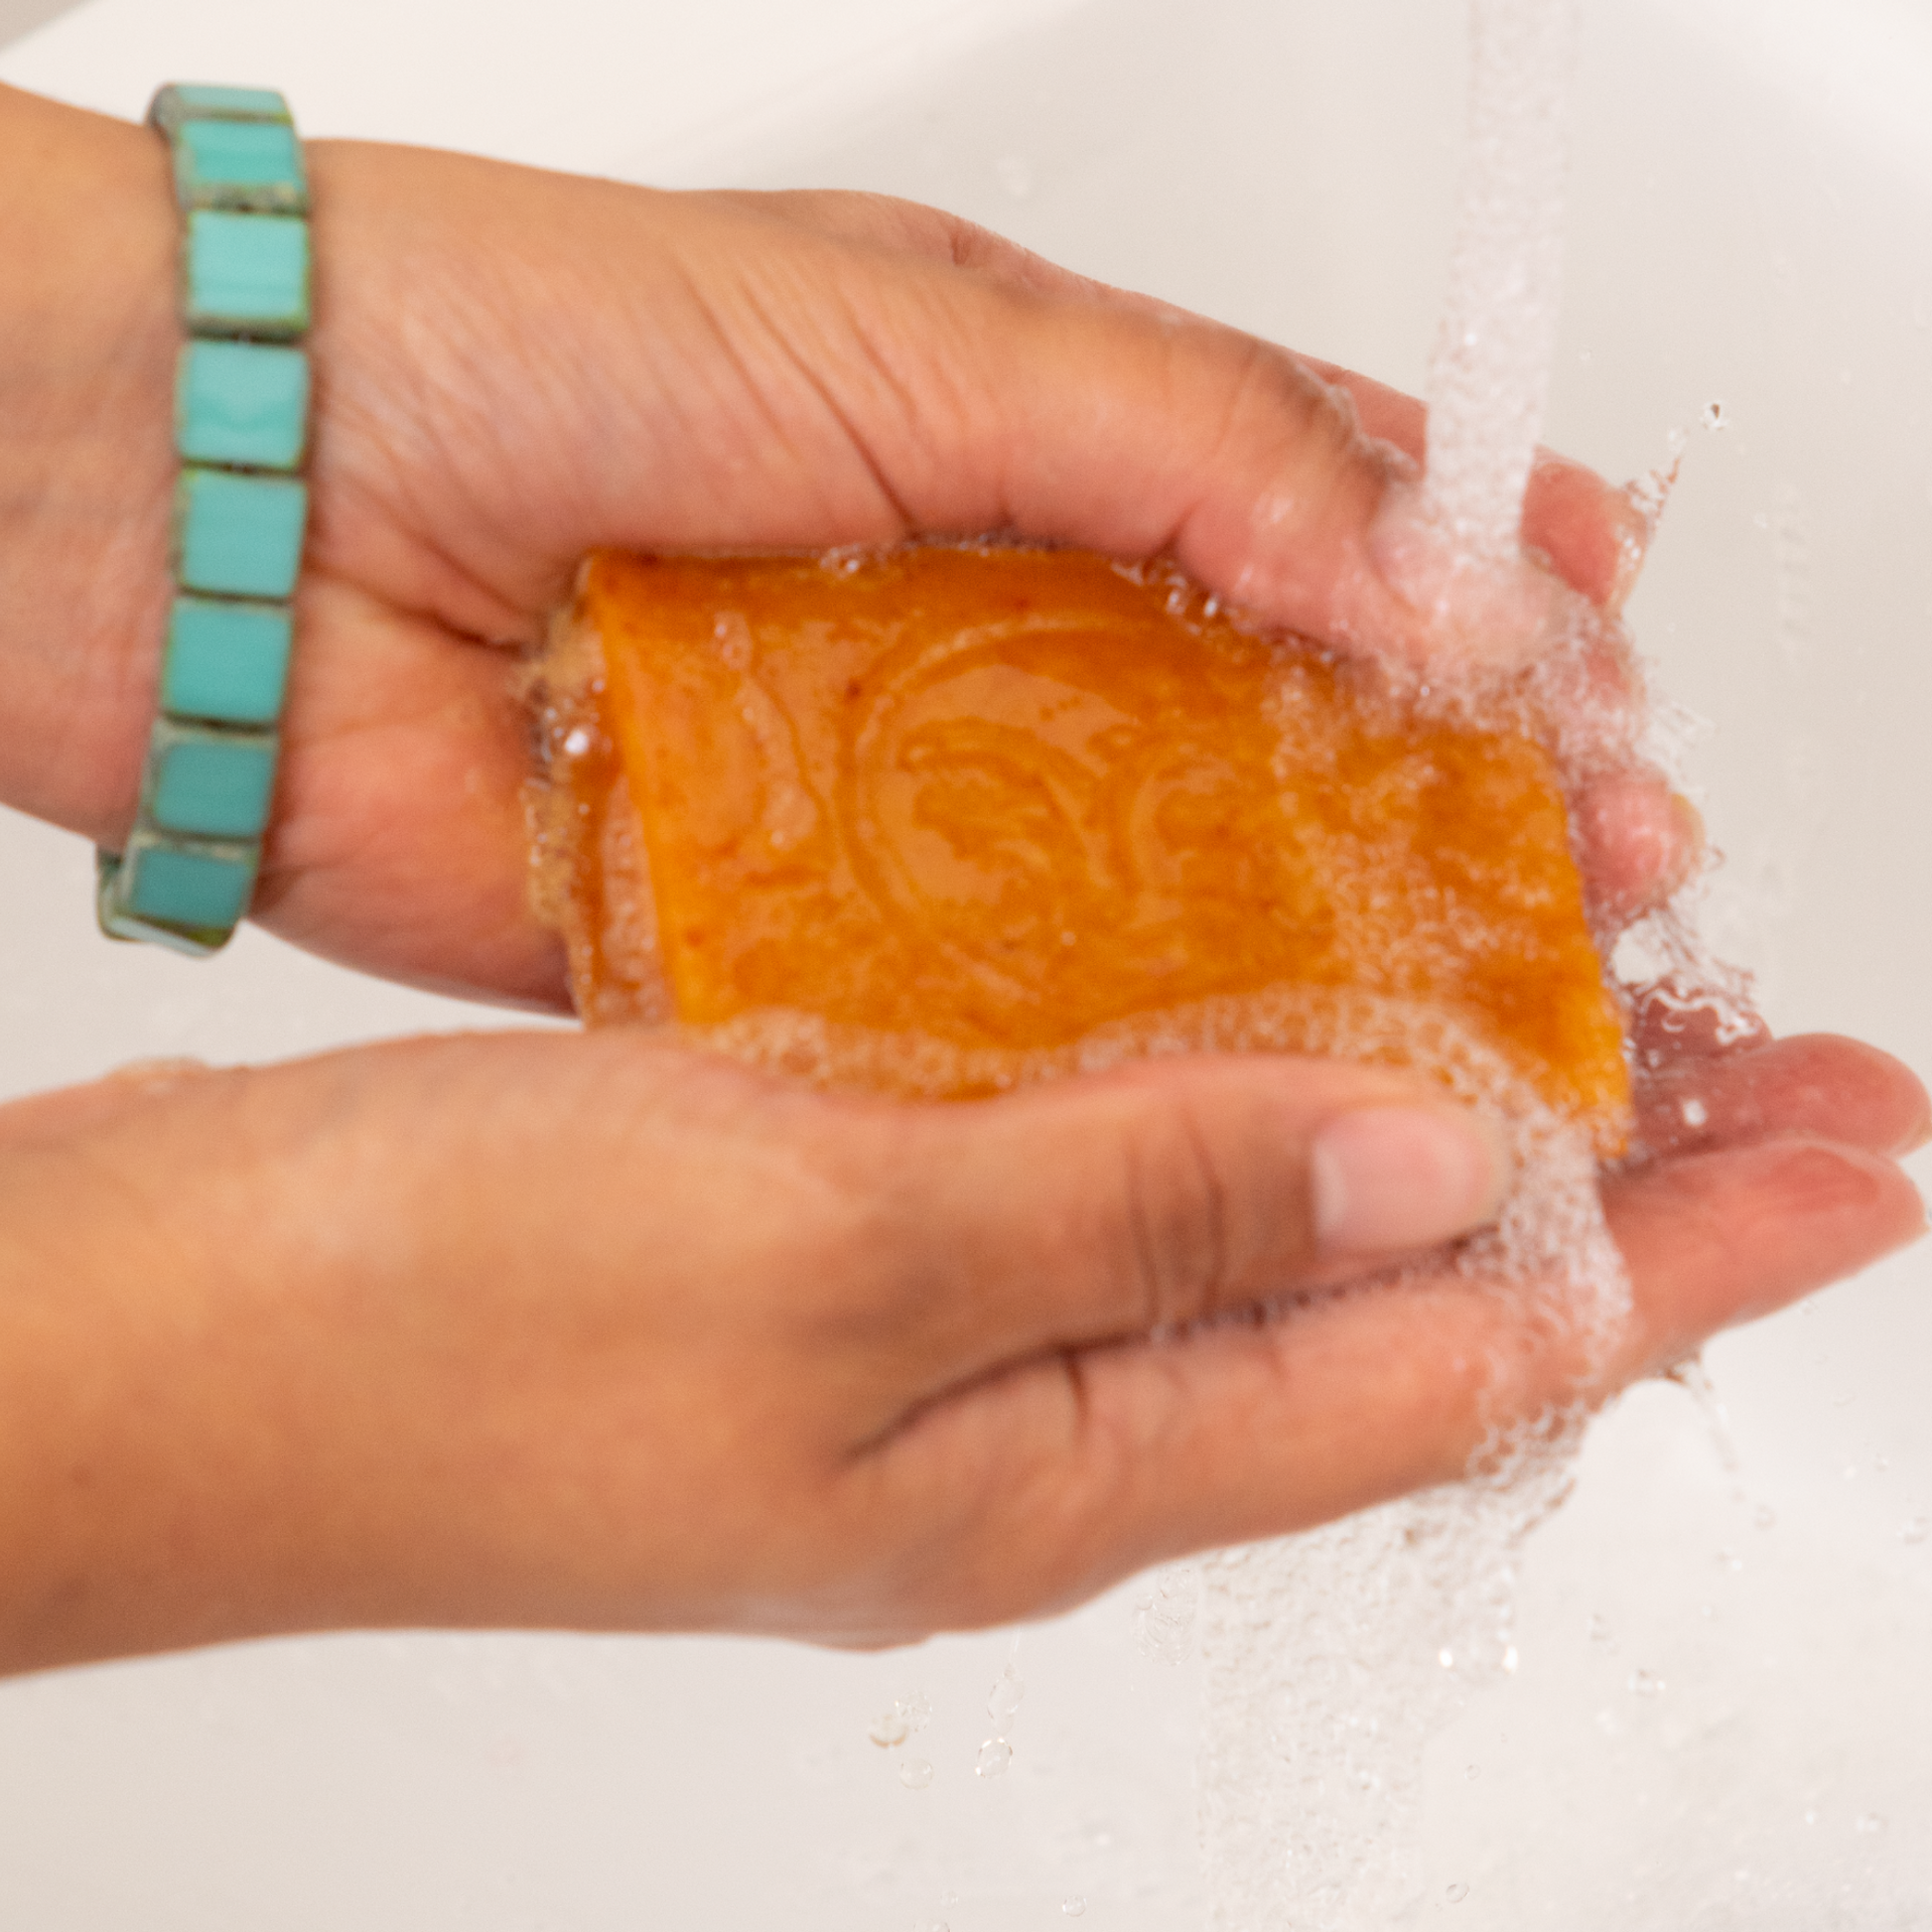 Moon Valley Organics Herbal Soap Bar Hands holding a lathered bar of soap under running water